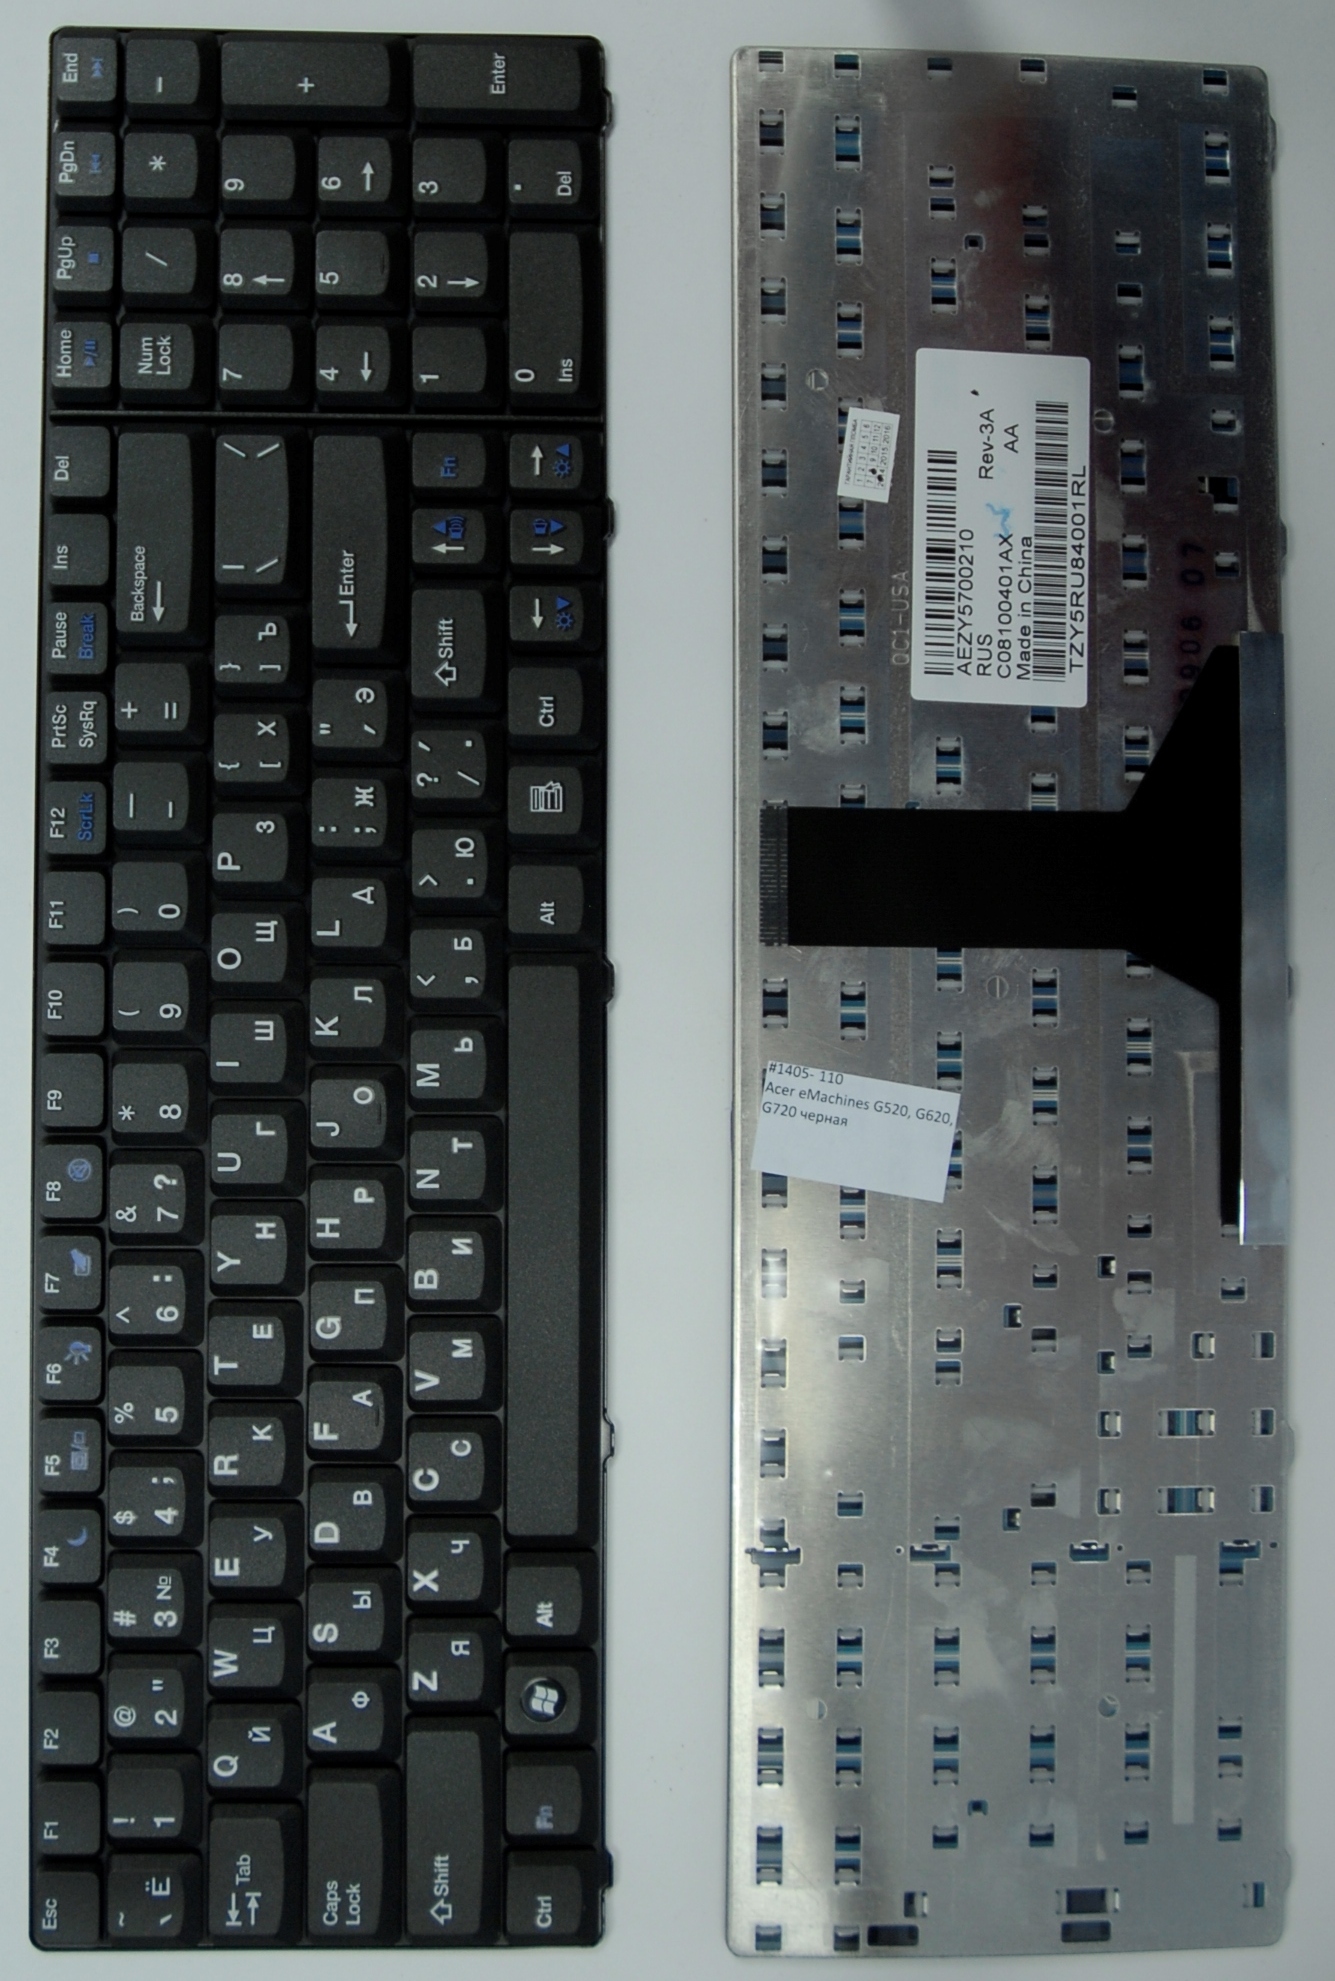    Acer eMachines G520, G620, G720 